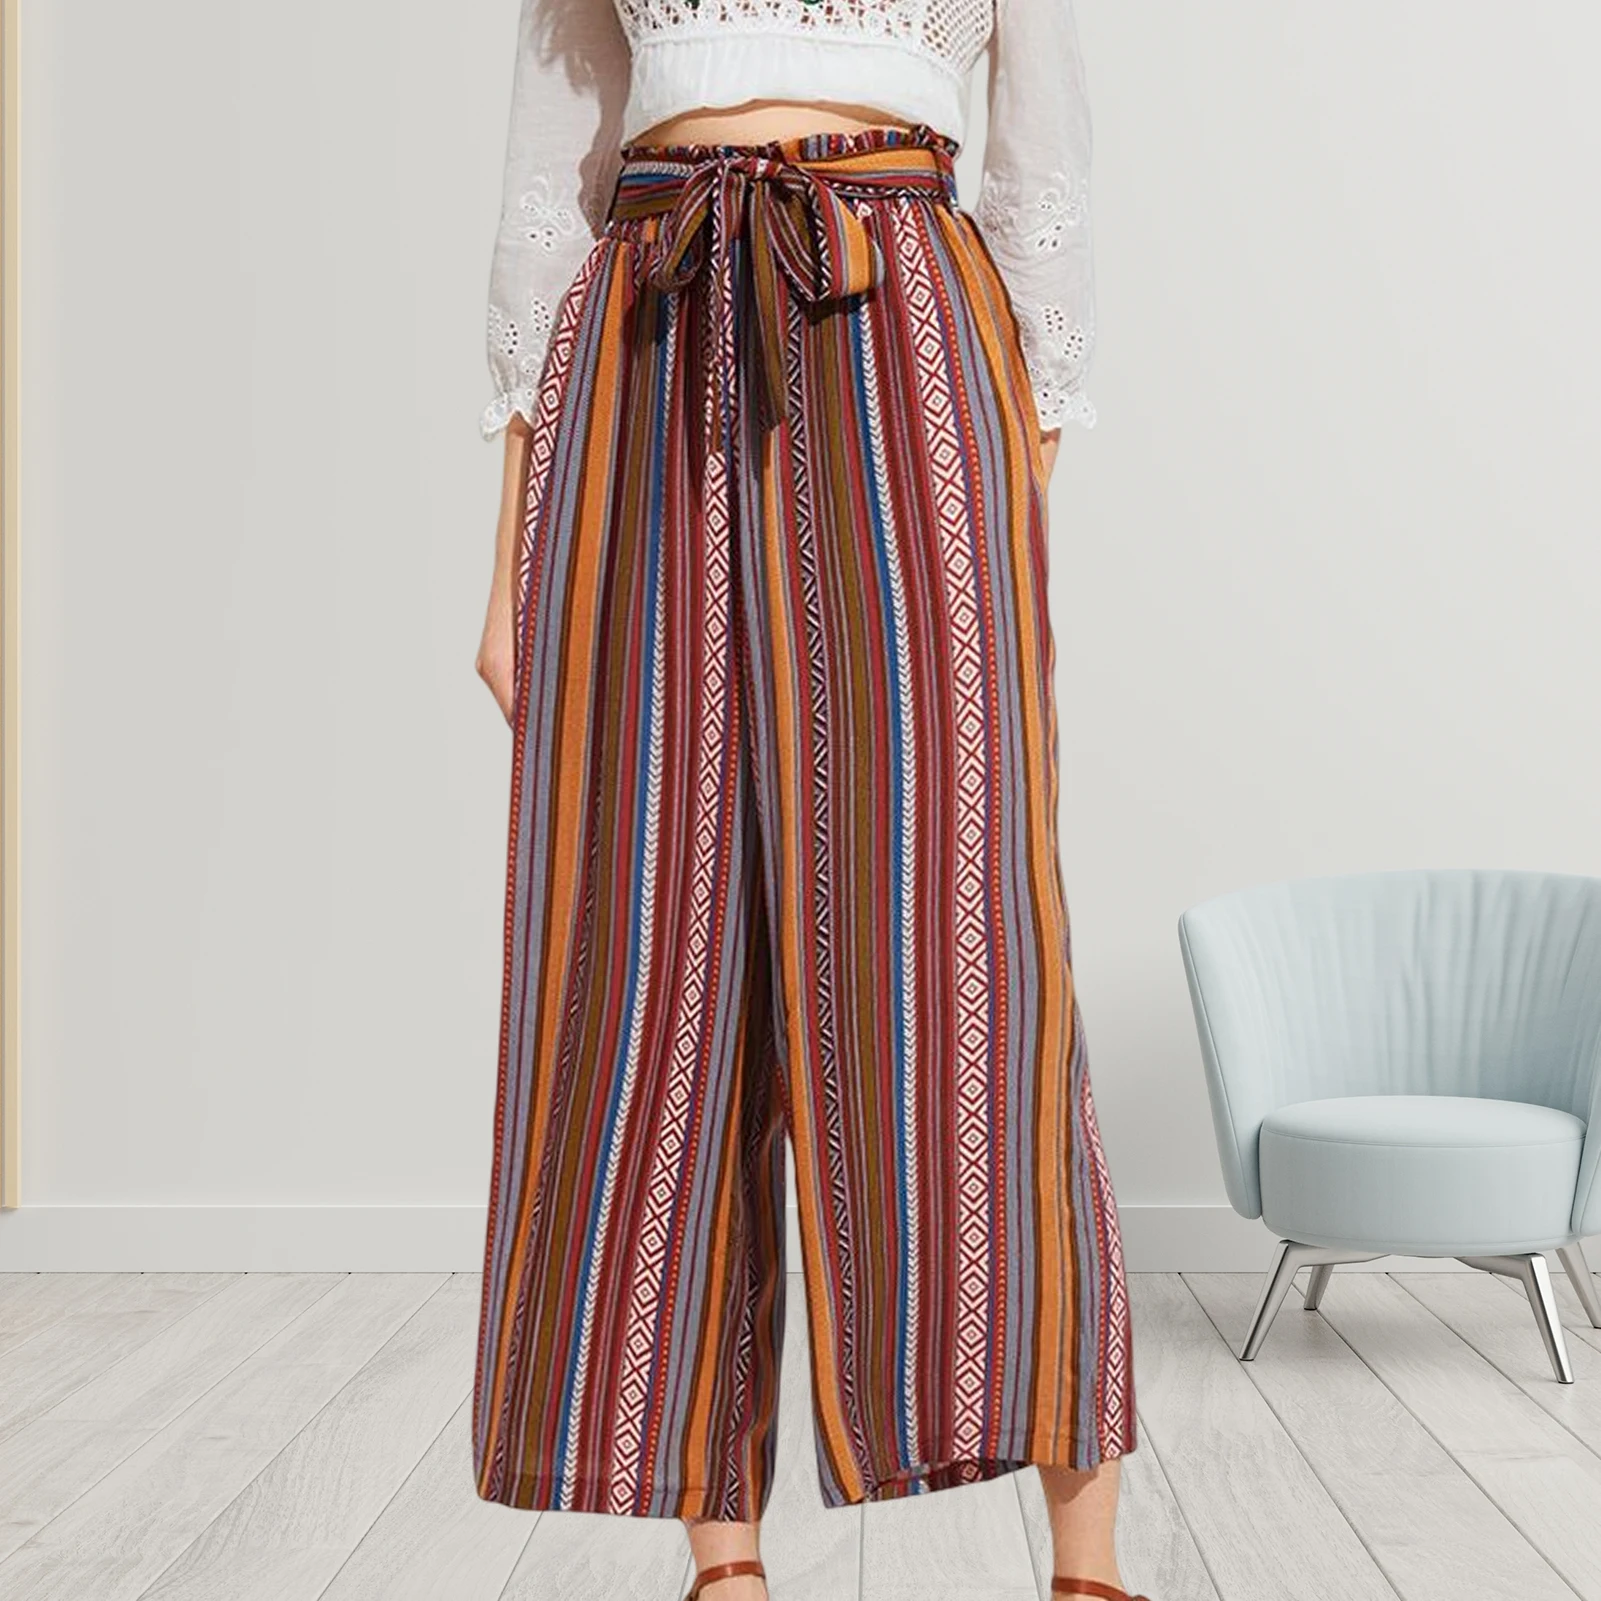 Women Wide Leg Pant Vertical Striped Ladies Casual Long Pants Ethnic Style Colorful Trousers High Waisted Vacation Outfit